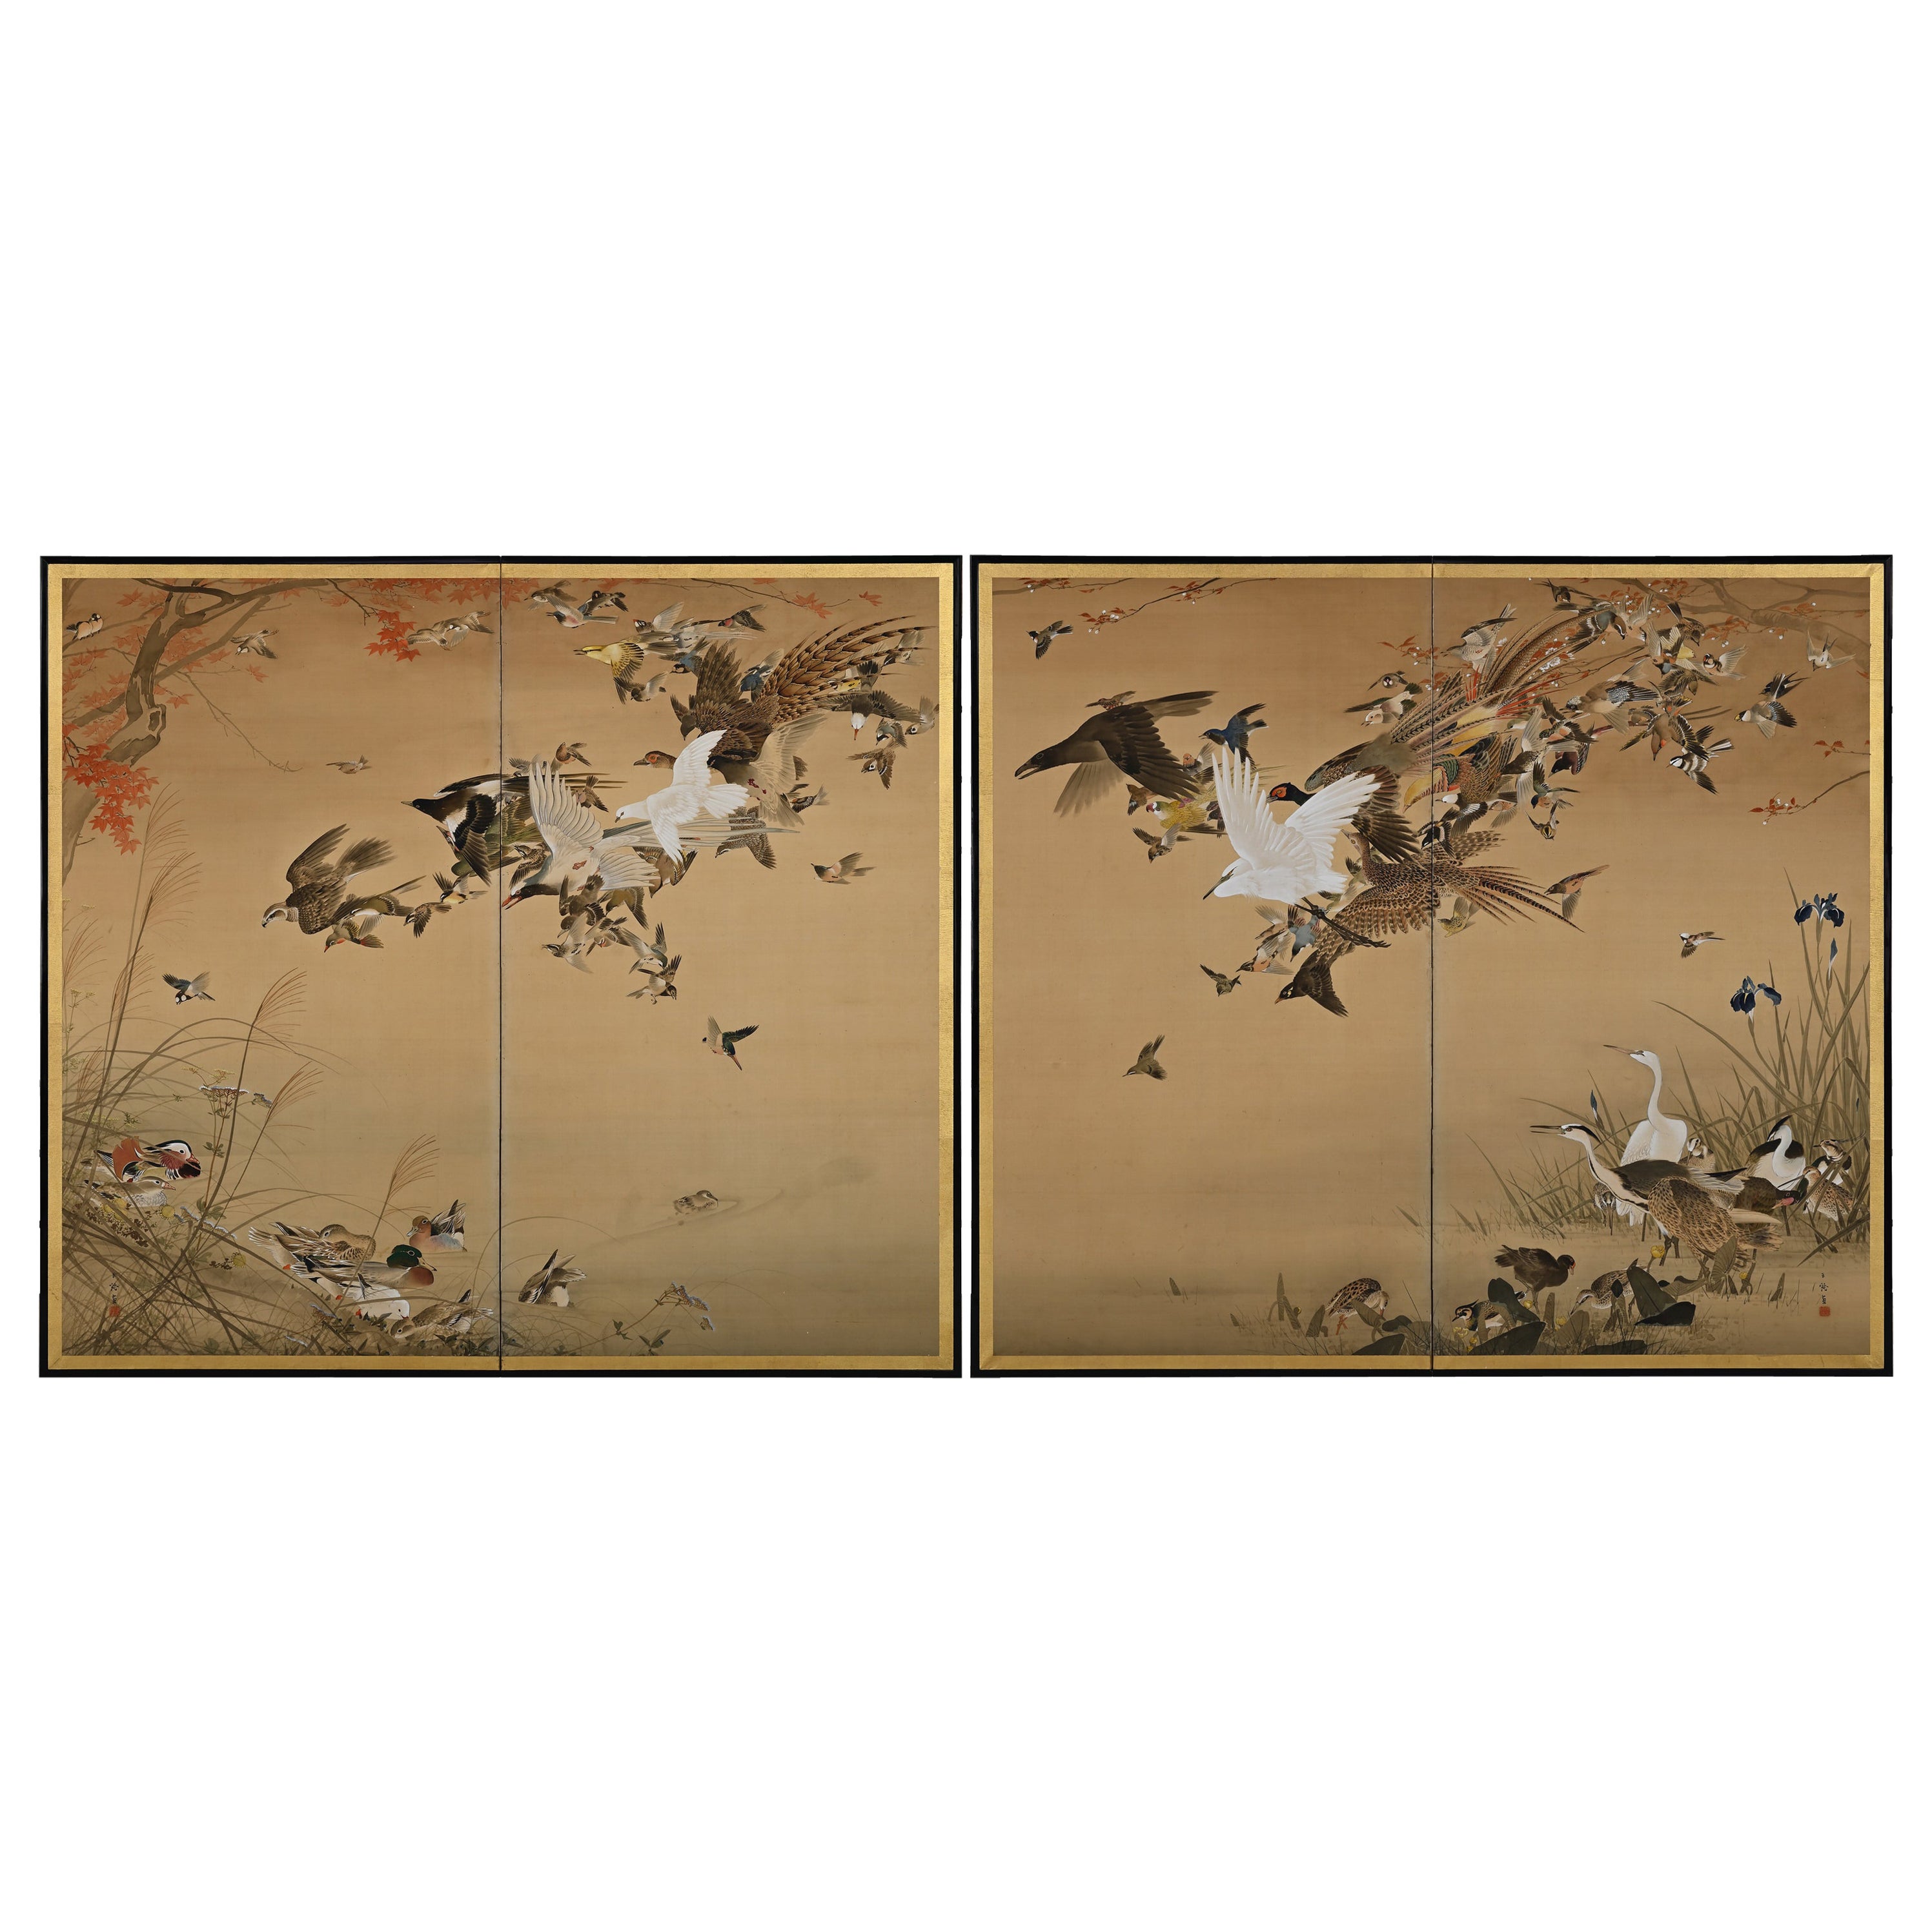 Meiji Period Japanese Screen Pair, One Hundred Birds by Hasegawa Gyokujun For Sale